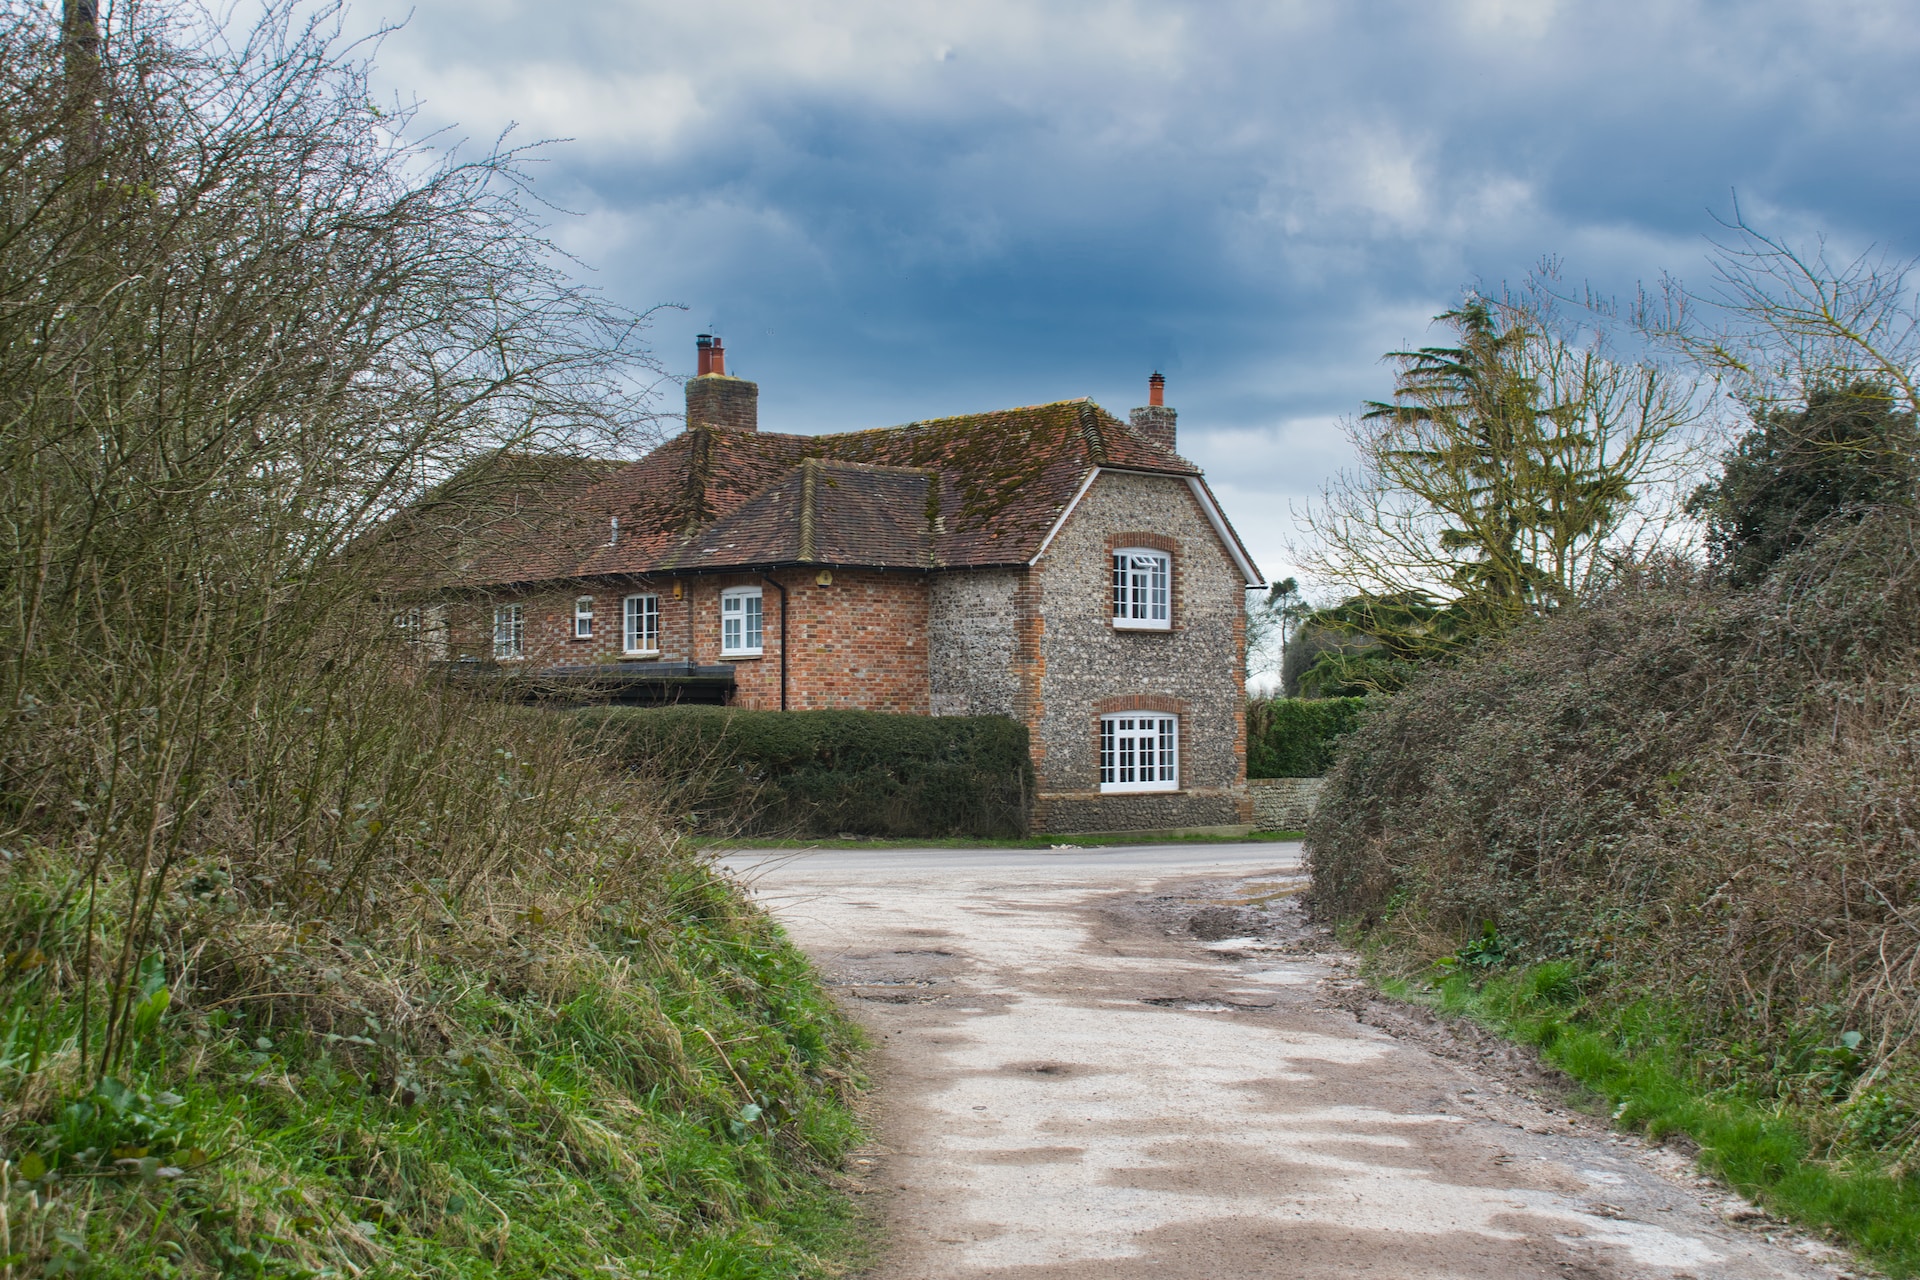 A large detached home viewed from the bottom of a long driveway in the UK countryside.